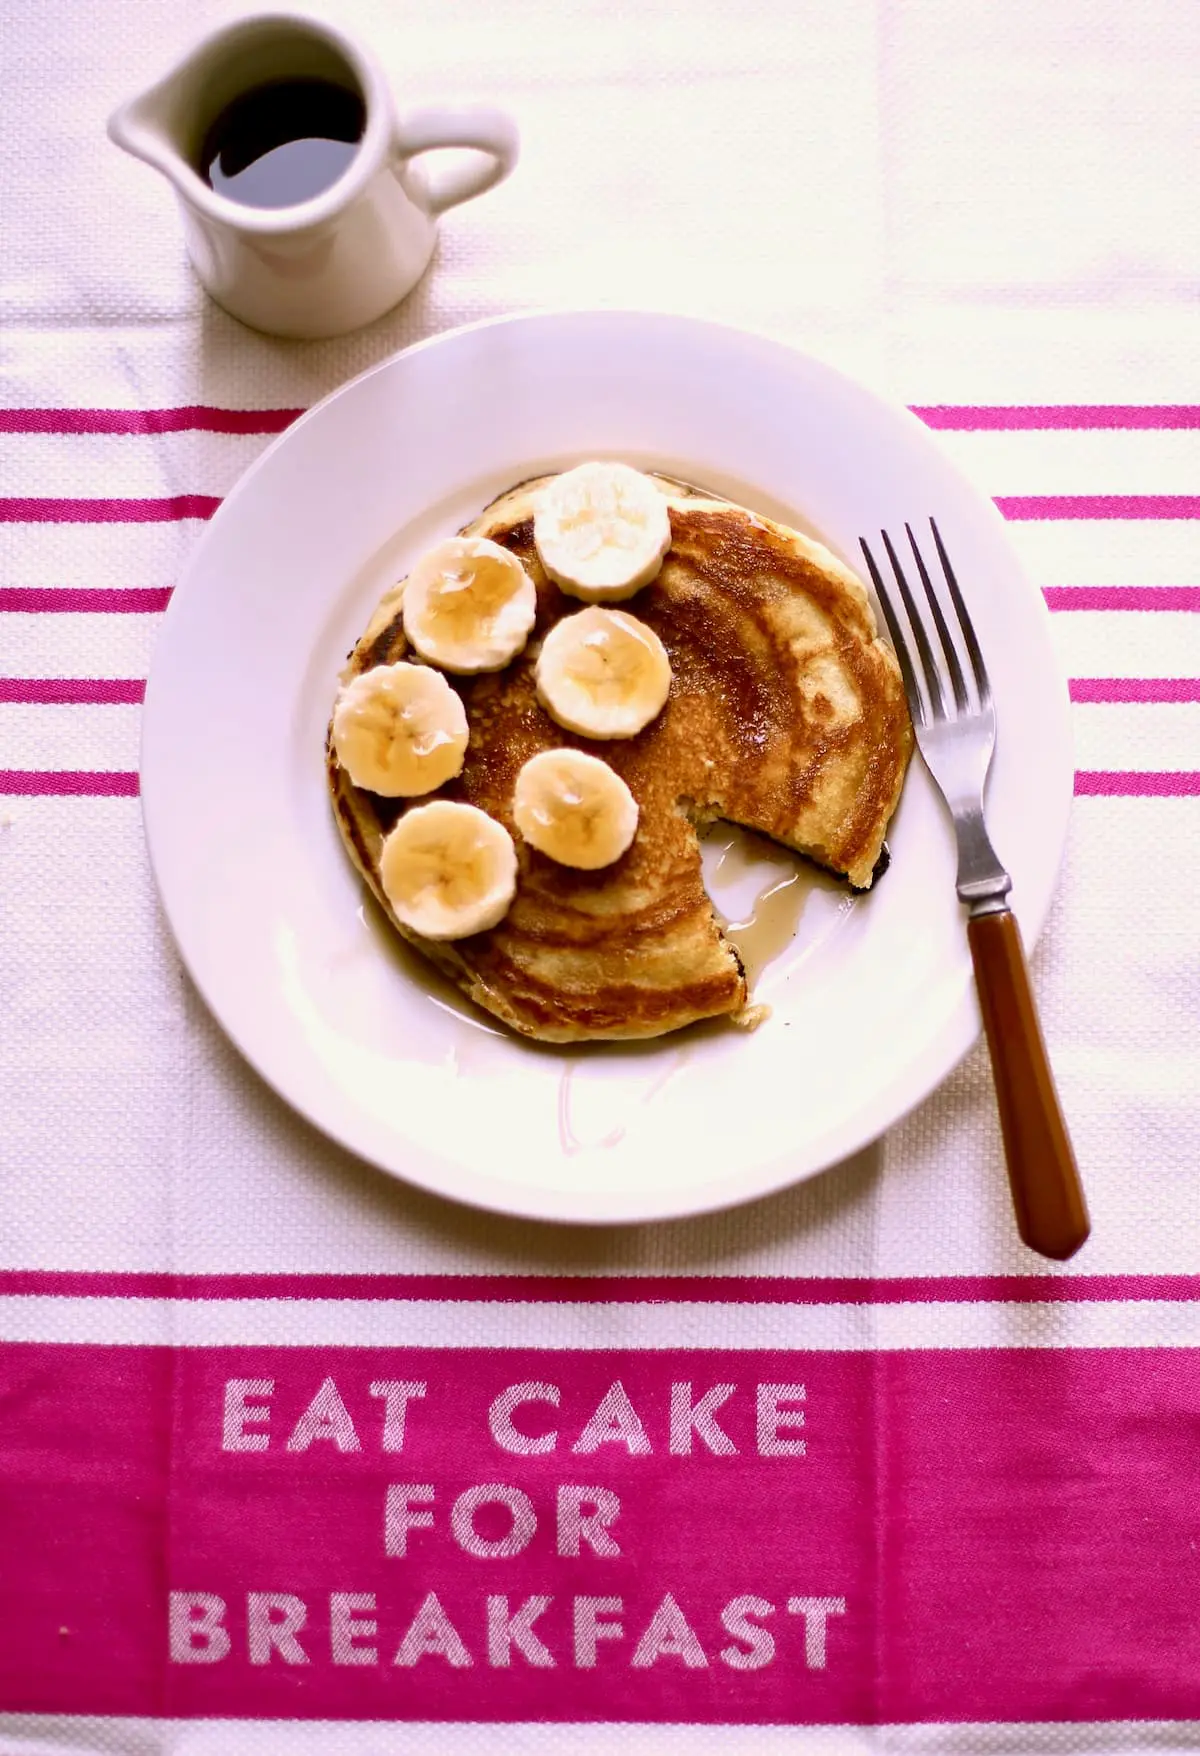 pancakes with bananas on a pink cloth with text